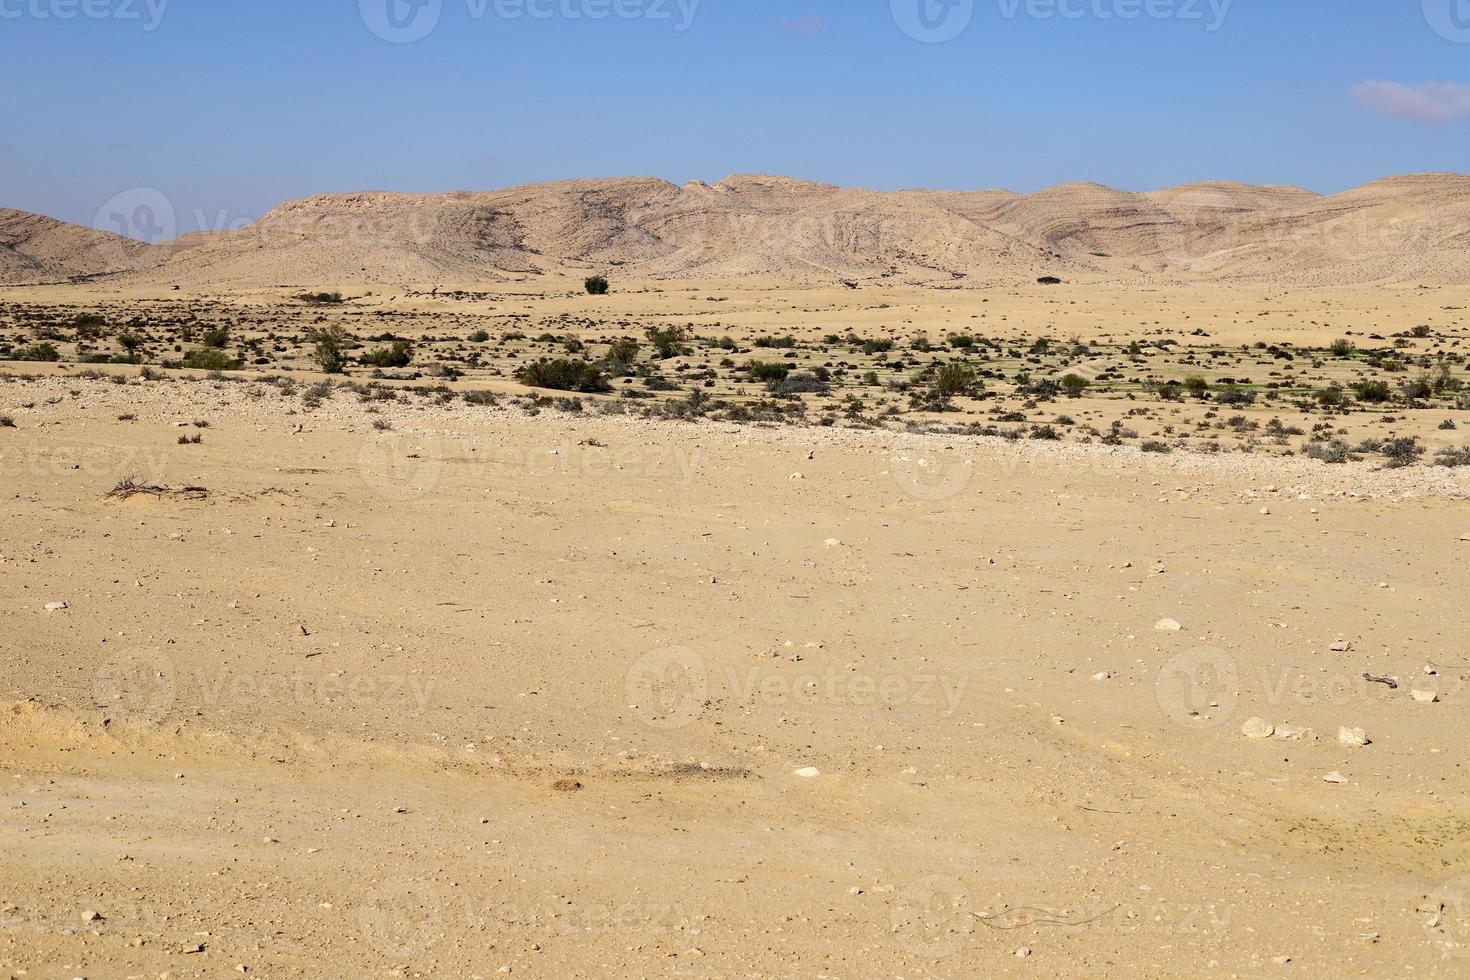 Mountains and rocks in the Judean Desert in the territory of Israel. photo